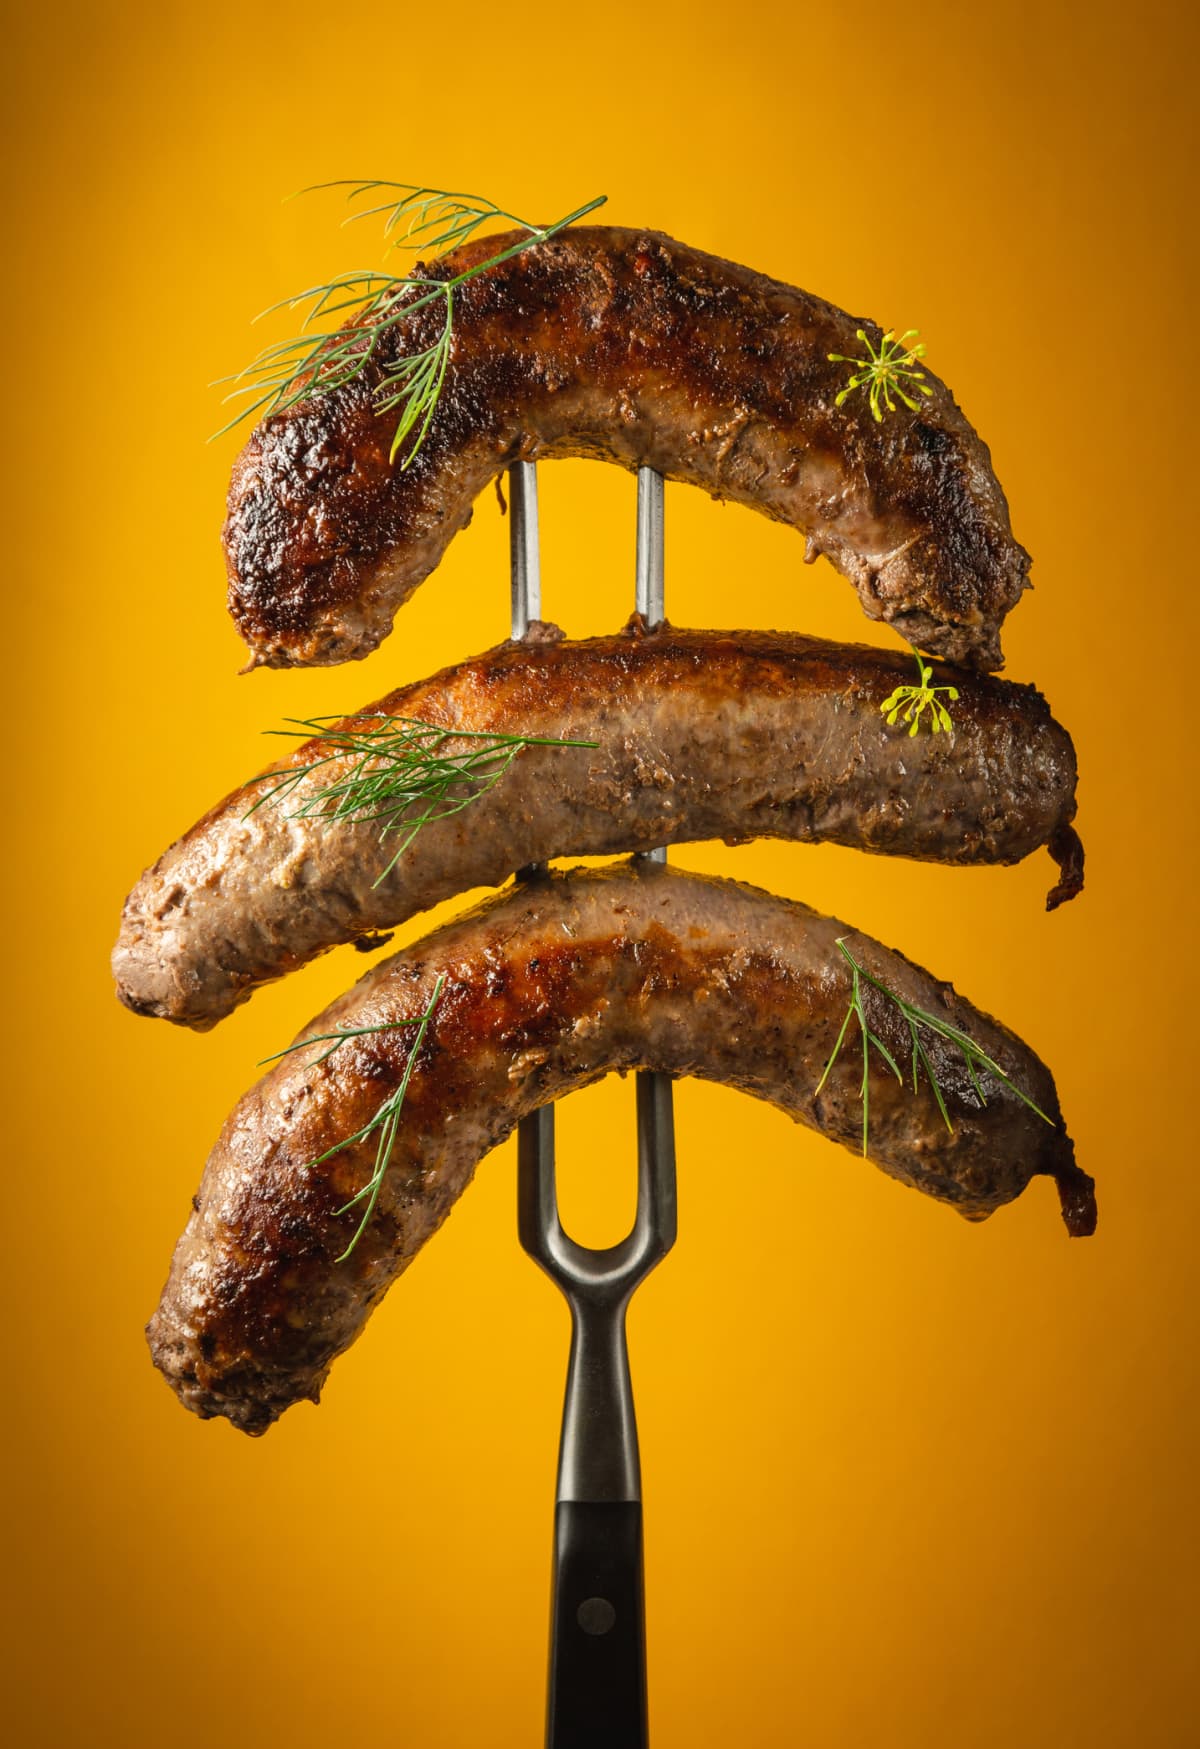 Grilled Bavarian sausages with rosemary.  Sausages  on a fork sprinkled with rosemary.